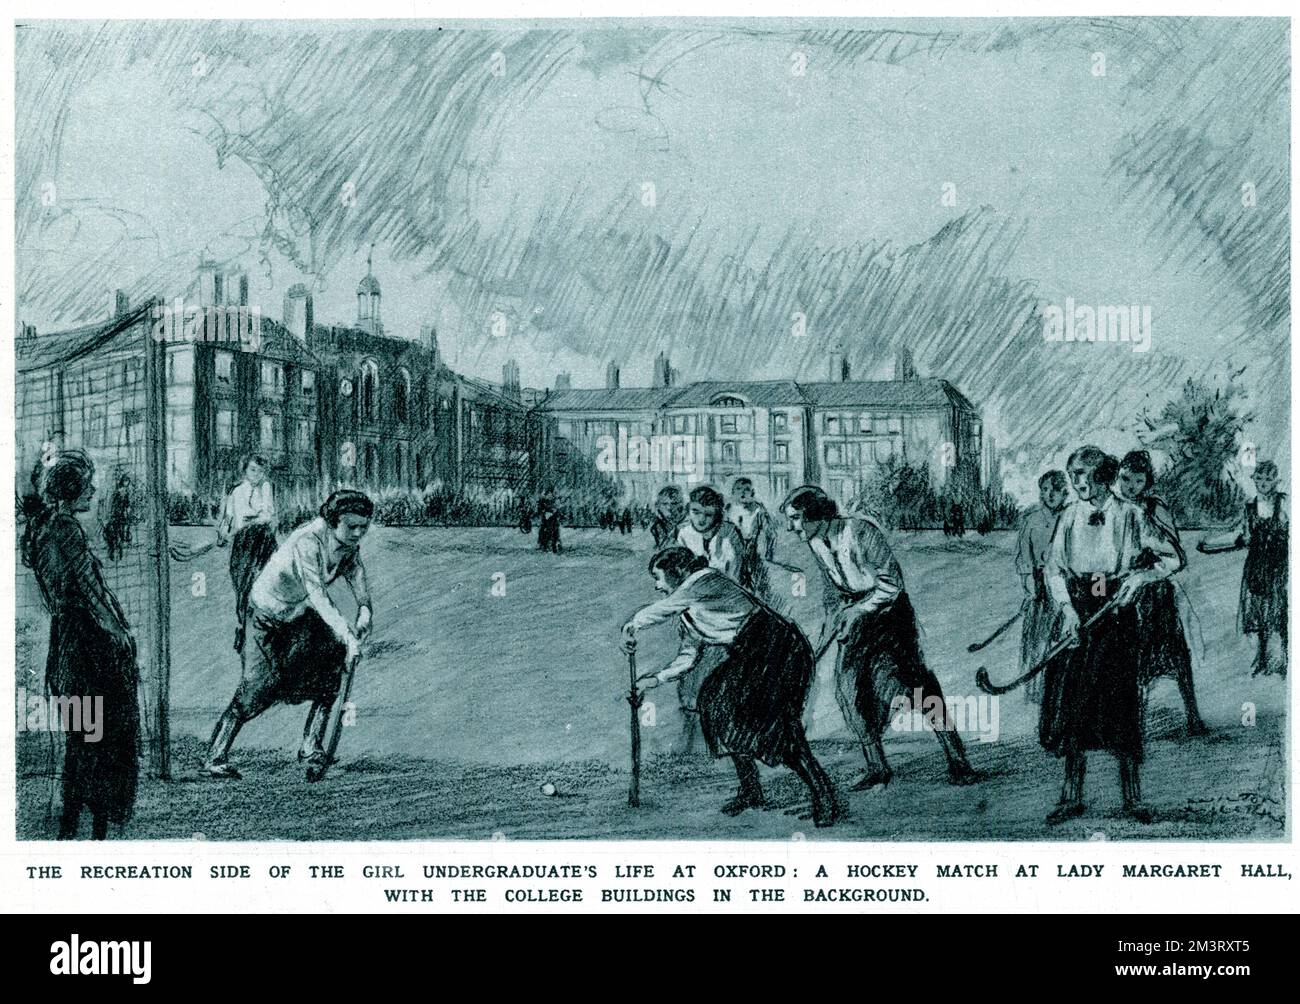 Undergraduate female students playing a hockey match at Lady Margaret Hall, Oxford on a field, with the college buildings in the background. Lady Margaret Hall was established in 1879 and admitted women for the first time to Oxford University for tertiary education. This image forms part of a larger article on recreational activities for girls at Oxford which remarks that 'the girl undergraduate's life is very like that of her masculine contemporary'.     Date: 1920 Stock Photo